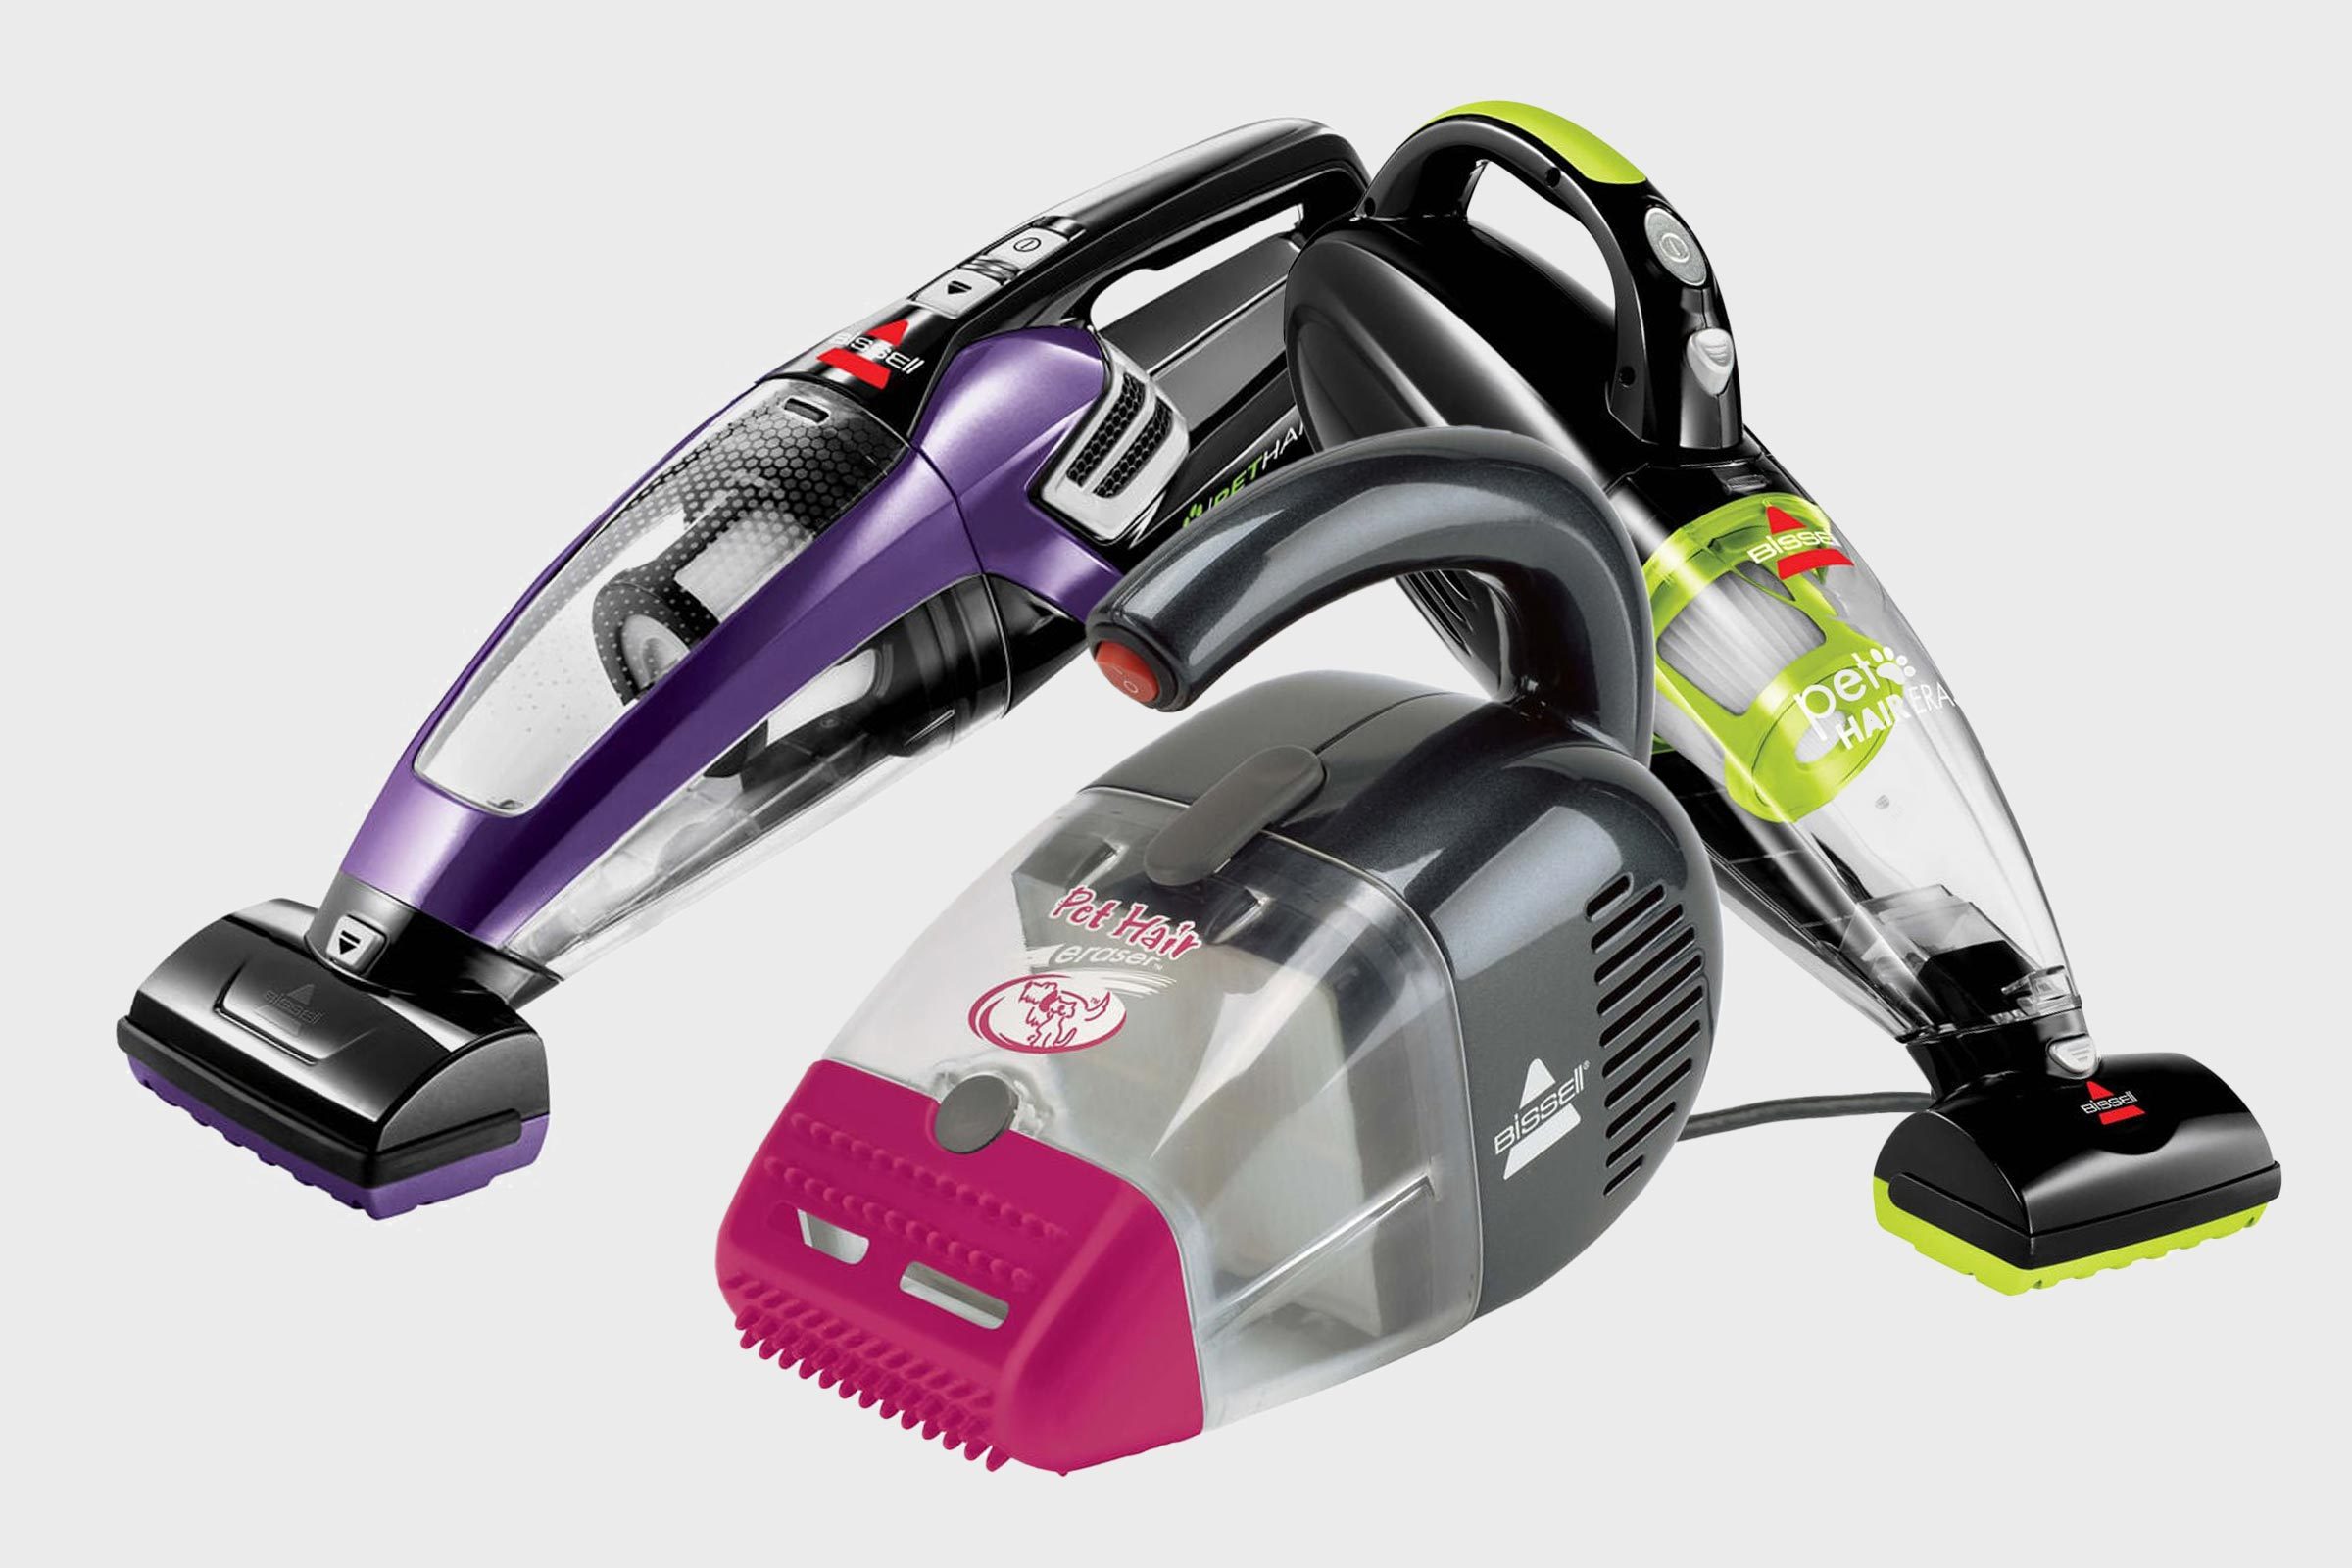 BISSELL Pet Hair Eraser Cordless Hand Vacuum, 1782 Powerful Suction Deeper  Clean